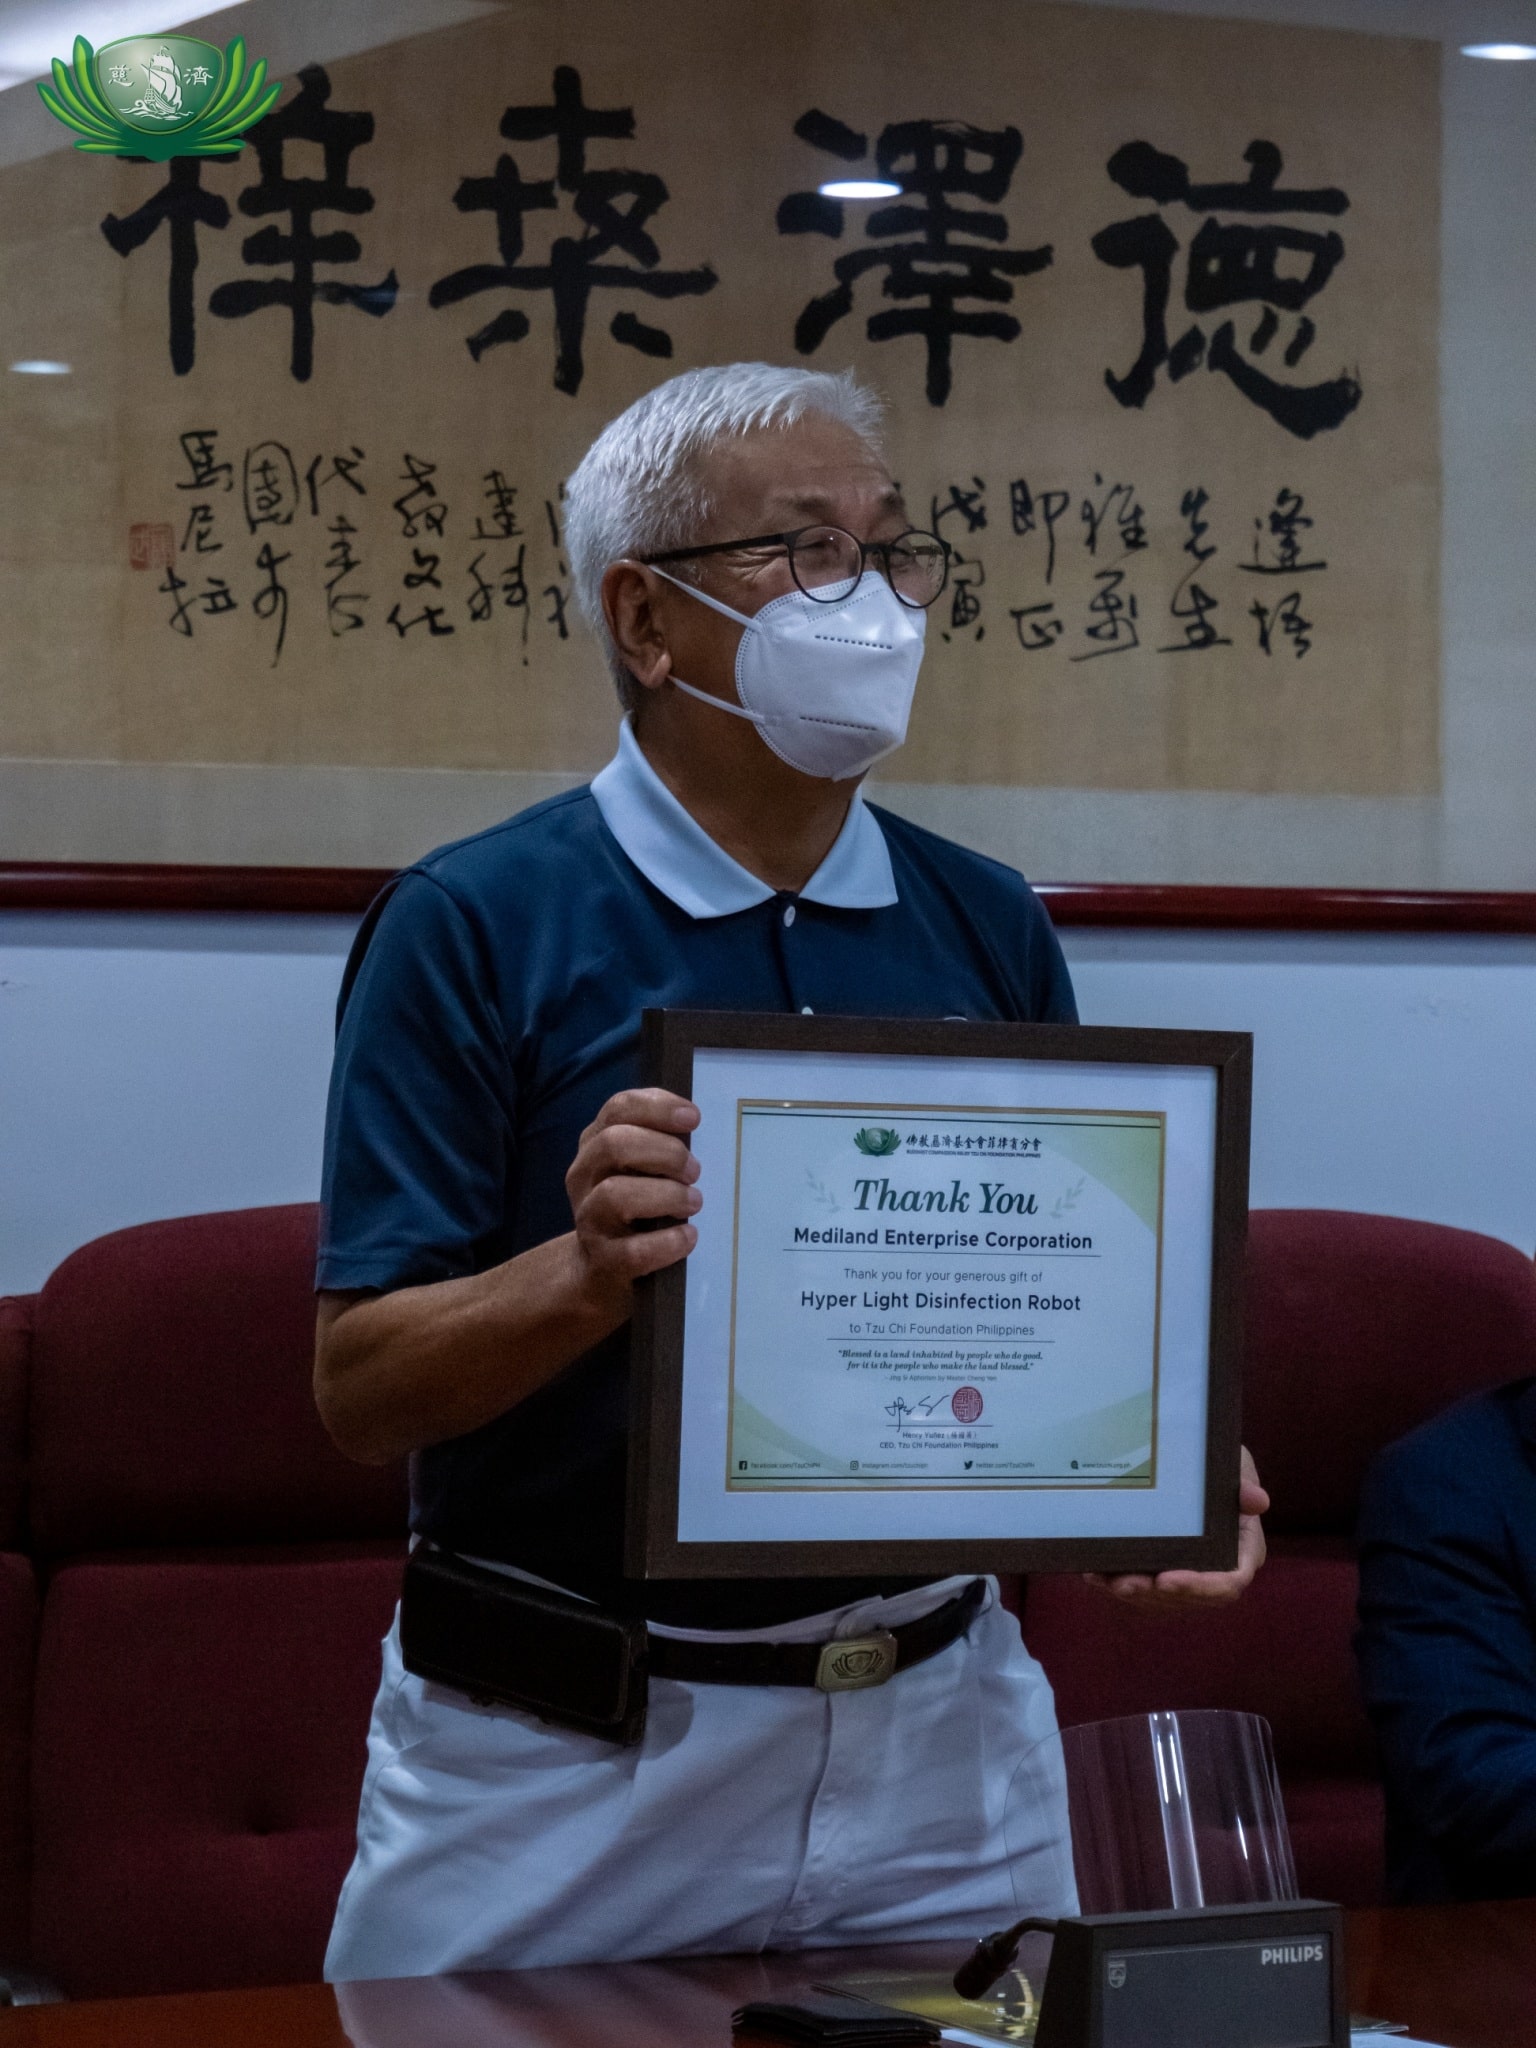 Tzu Chi Philippines CEO Henry Yuñez presents a certificate of appreciation to Jiang Xinhui, director and representative of Mediland Enterprise Corporation, for donating the Hyper Light Disinfection Robot to the Chinese General Hospital and Medical Center. 【Photo by Jeaneal Dando】